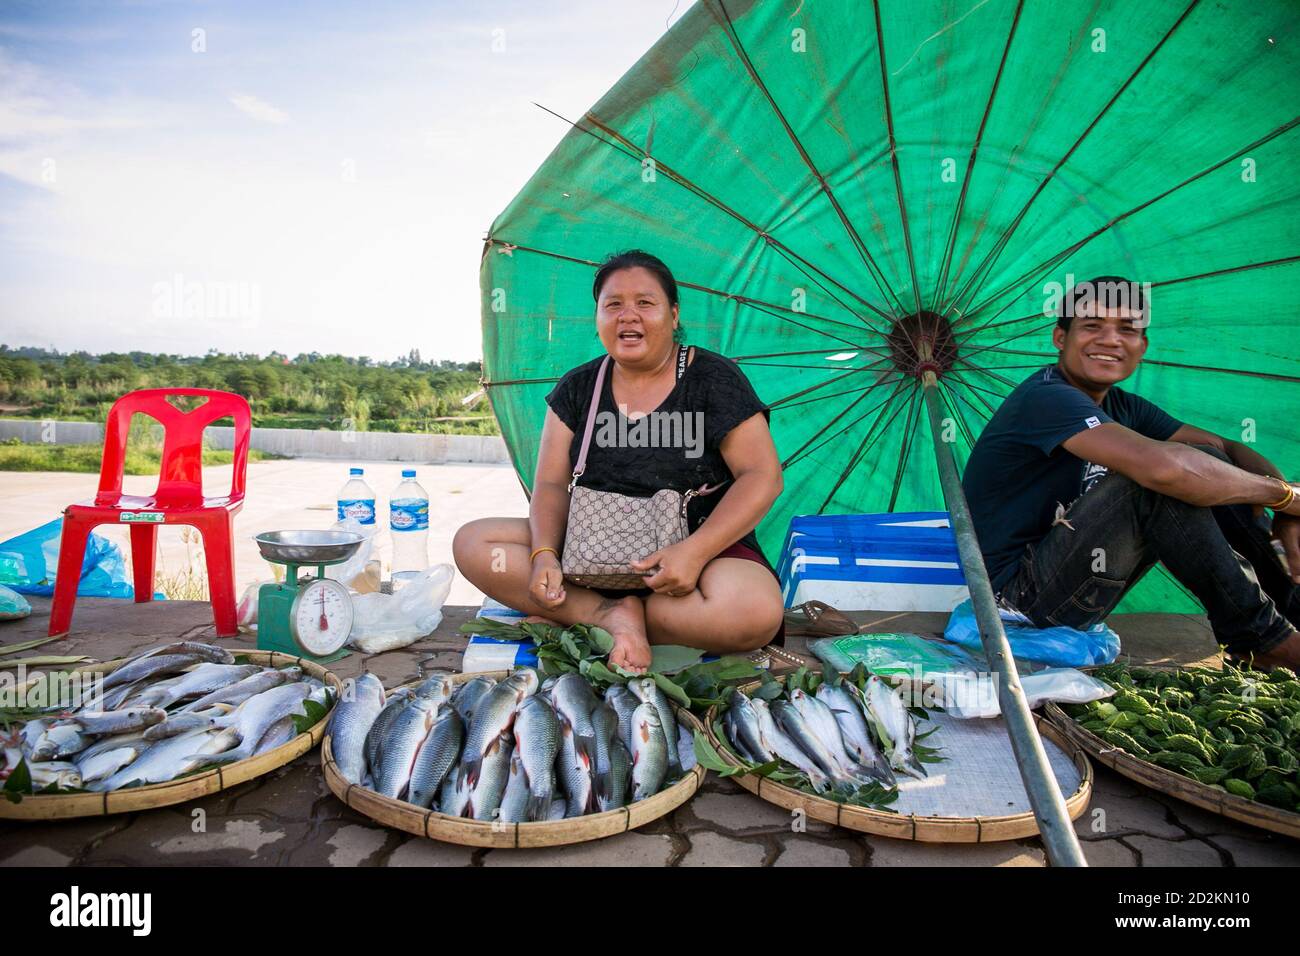 Vientiane, Laos. 10th June, 2020. A Lao lady sells fish in a market along the Mekong River in Vientiane, Laos, on June 10, 2020. Laos is the only landlocked country in Southeast Asia. In the central part of the country, the capital Vientiane is located on the alluvial plain on the Mekong River, suitable for fishing and plantation. The Lan Xang Kingdom, the first unified multi-ethnic nation in the history of Laos, moved its capital to Vientiane in the mid-16th century, and Vientiane gradually prospered. Credit: Kaikeo Saiyasane/Xinhua/Alamy Live News Stock Photo